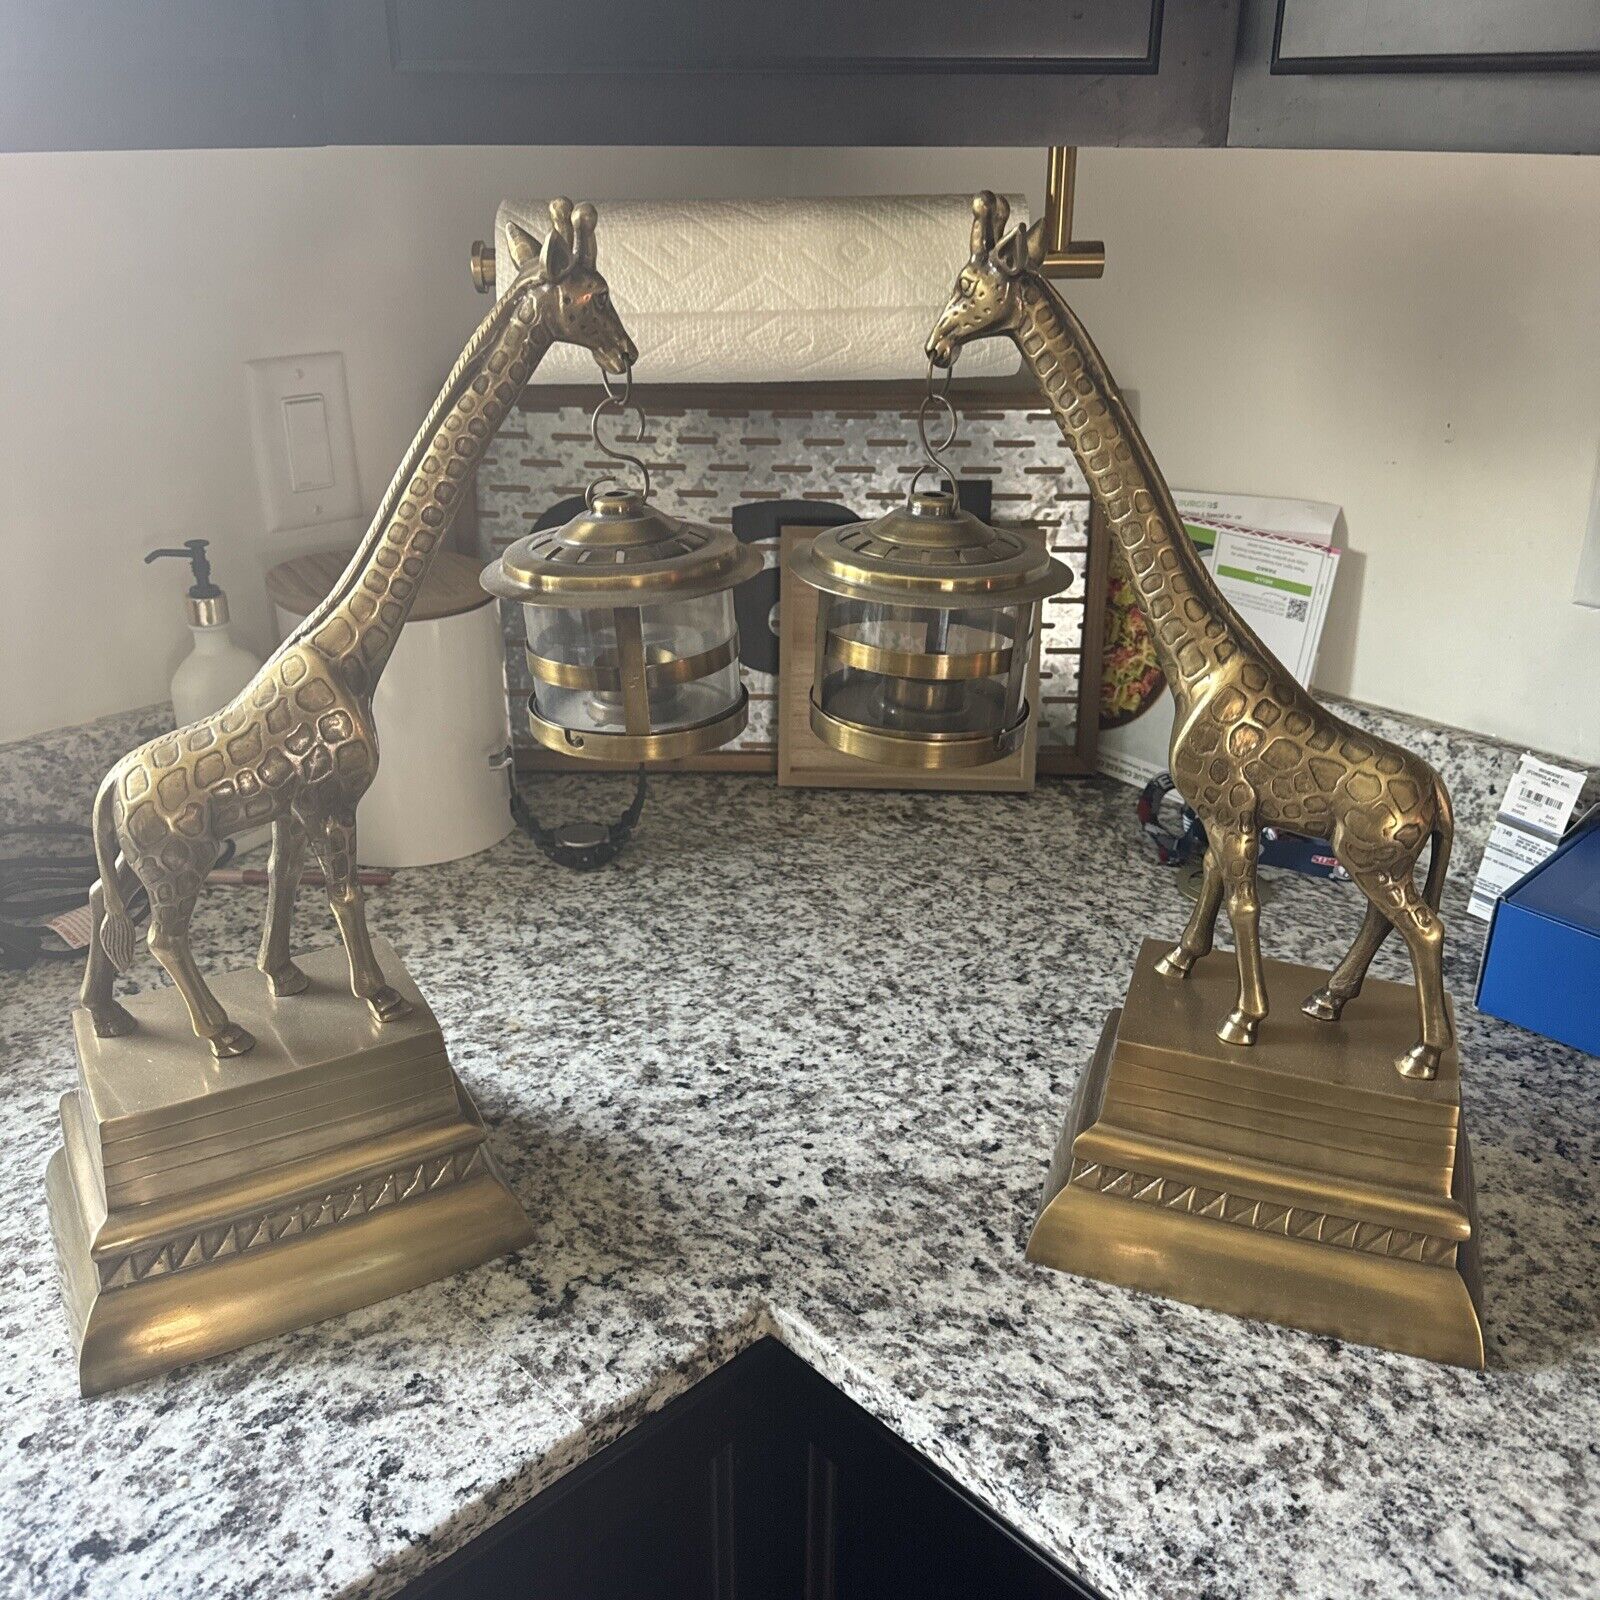 2 Brass Giraffe Candle Holders Figurines by Interlude Home Inc